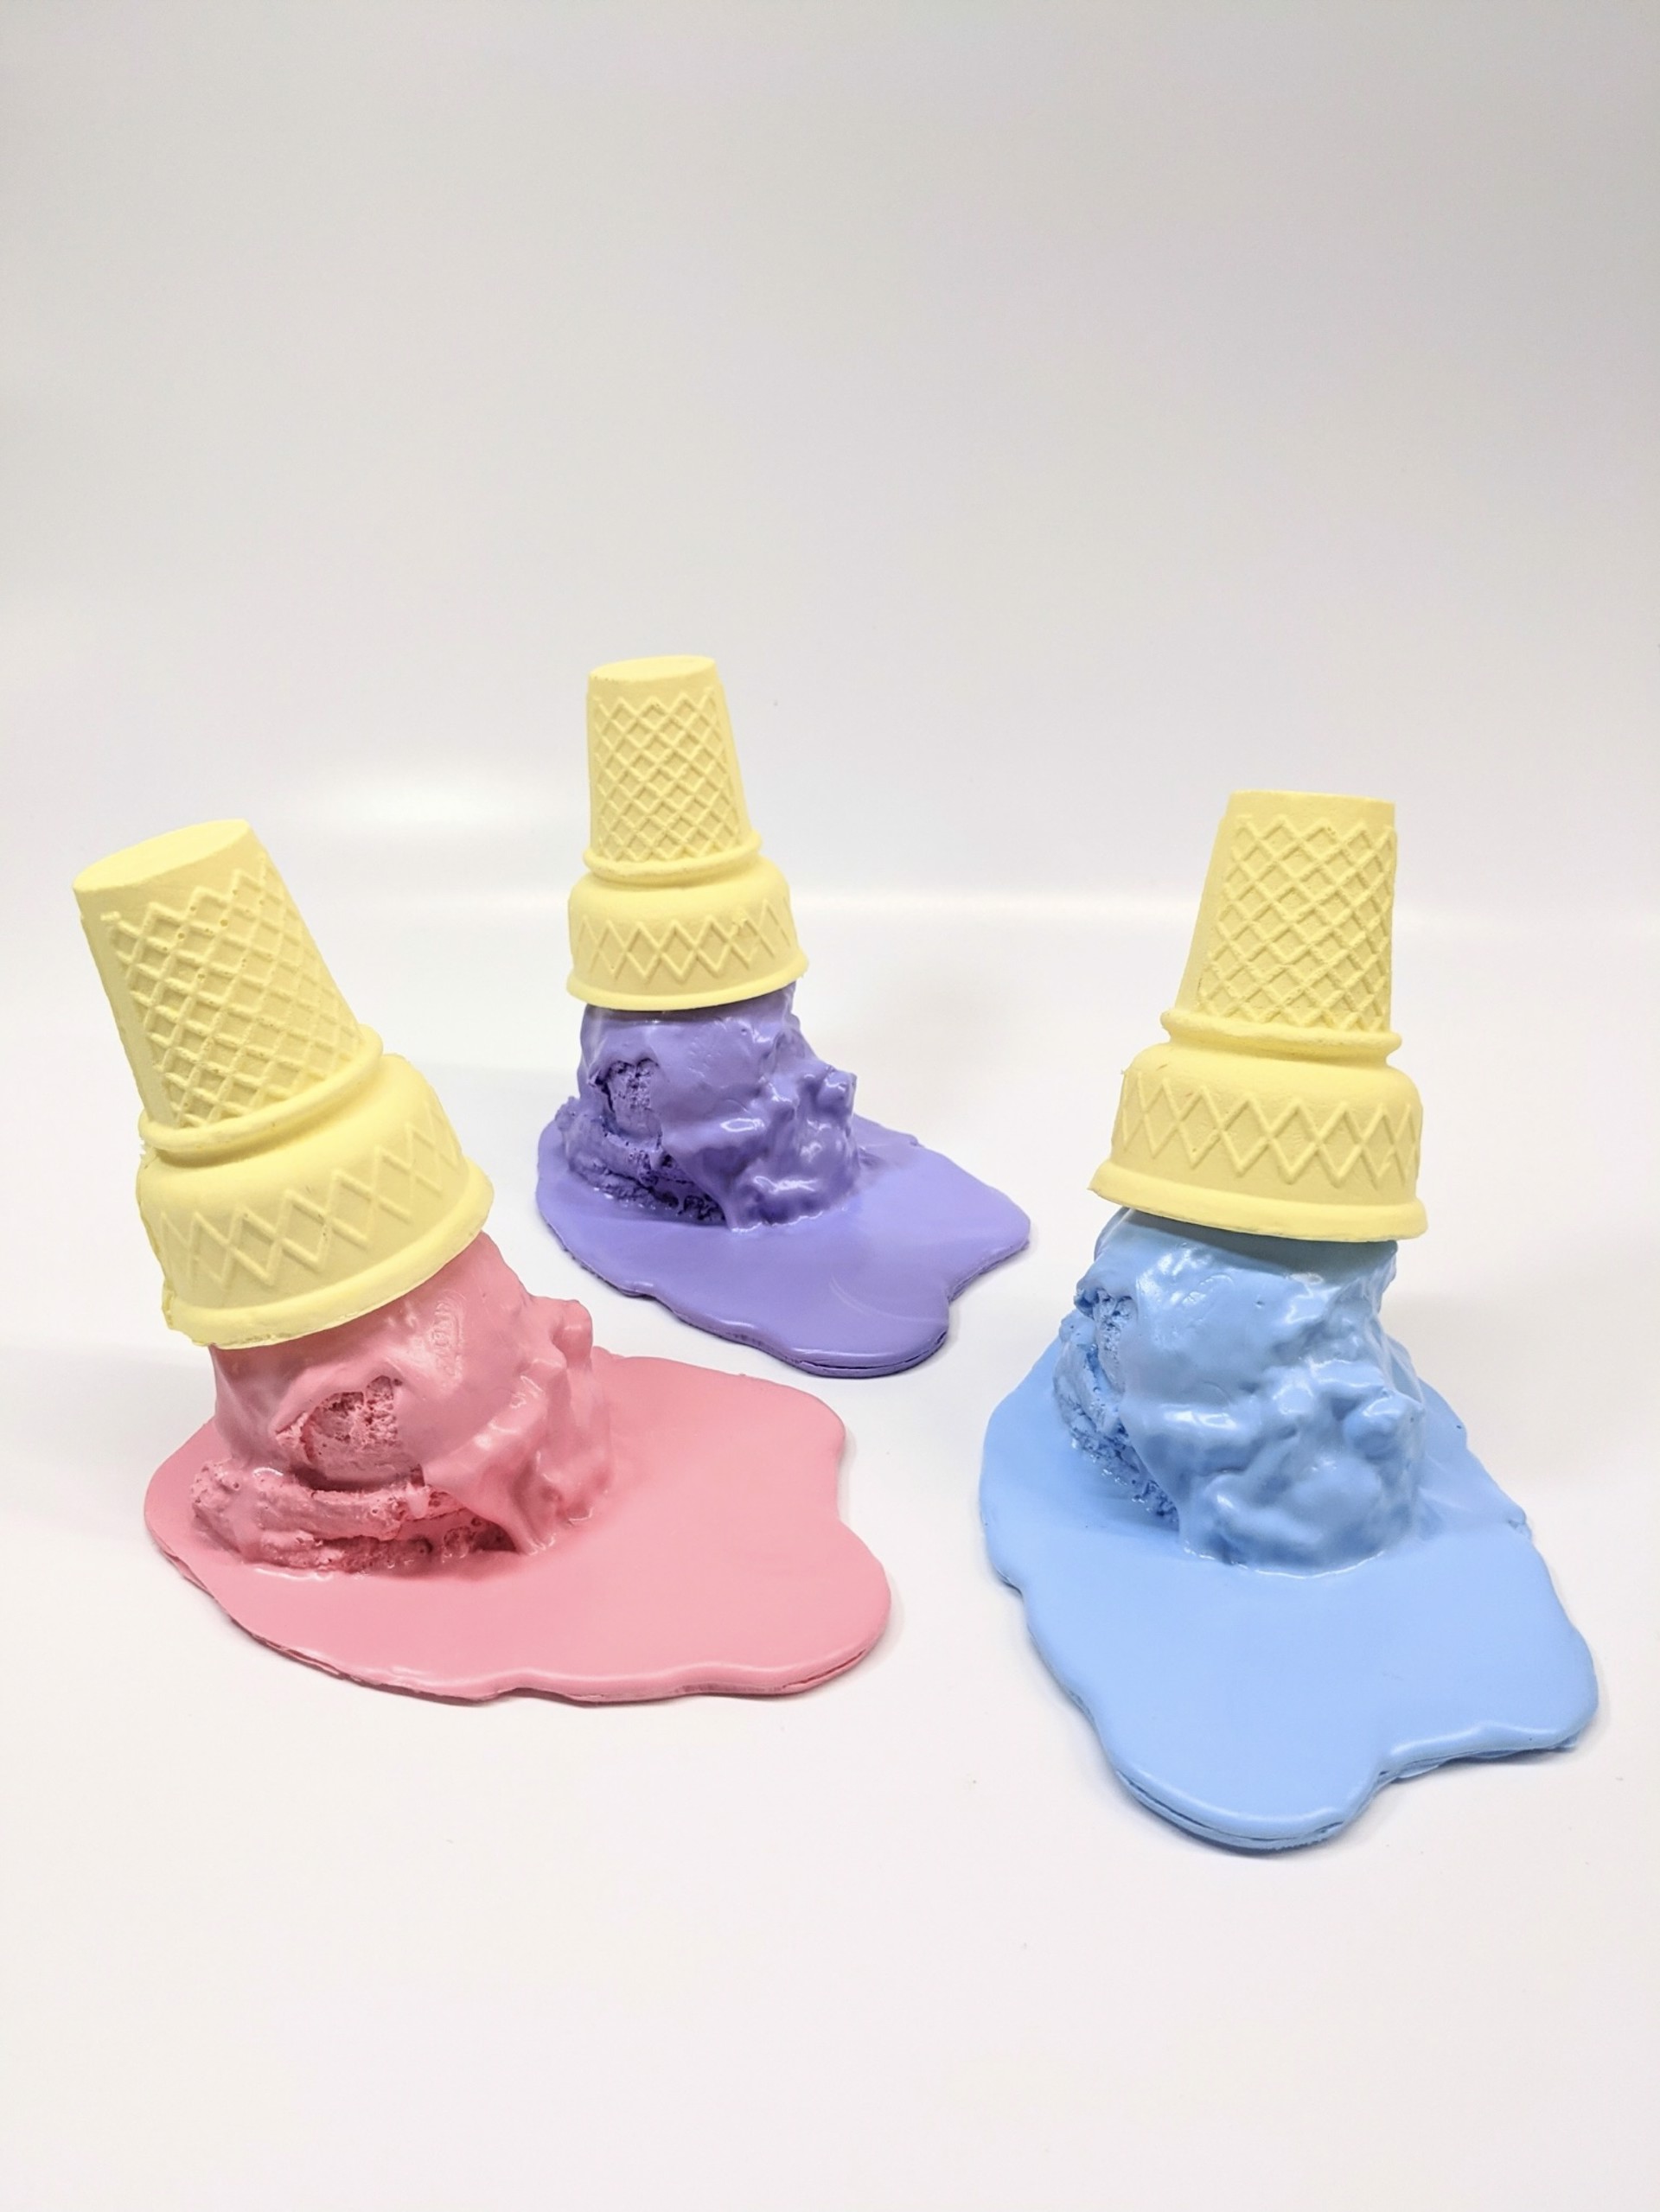 Melty Puddle Scoop Flat Cone #5 by Jourdan Joly